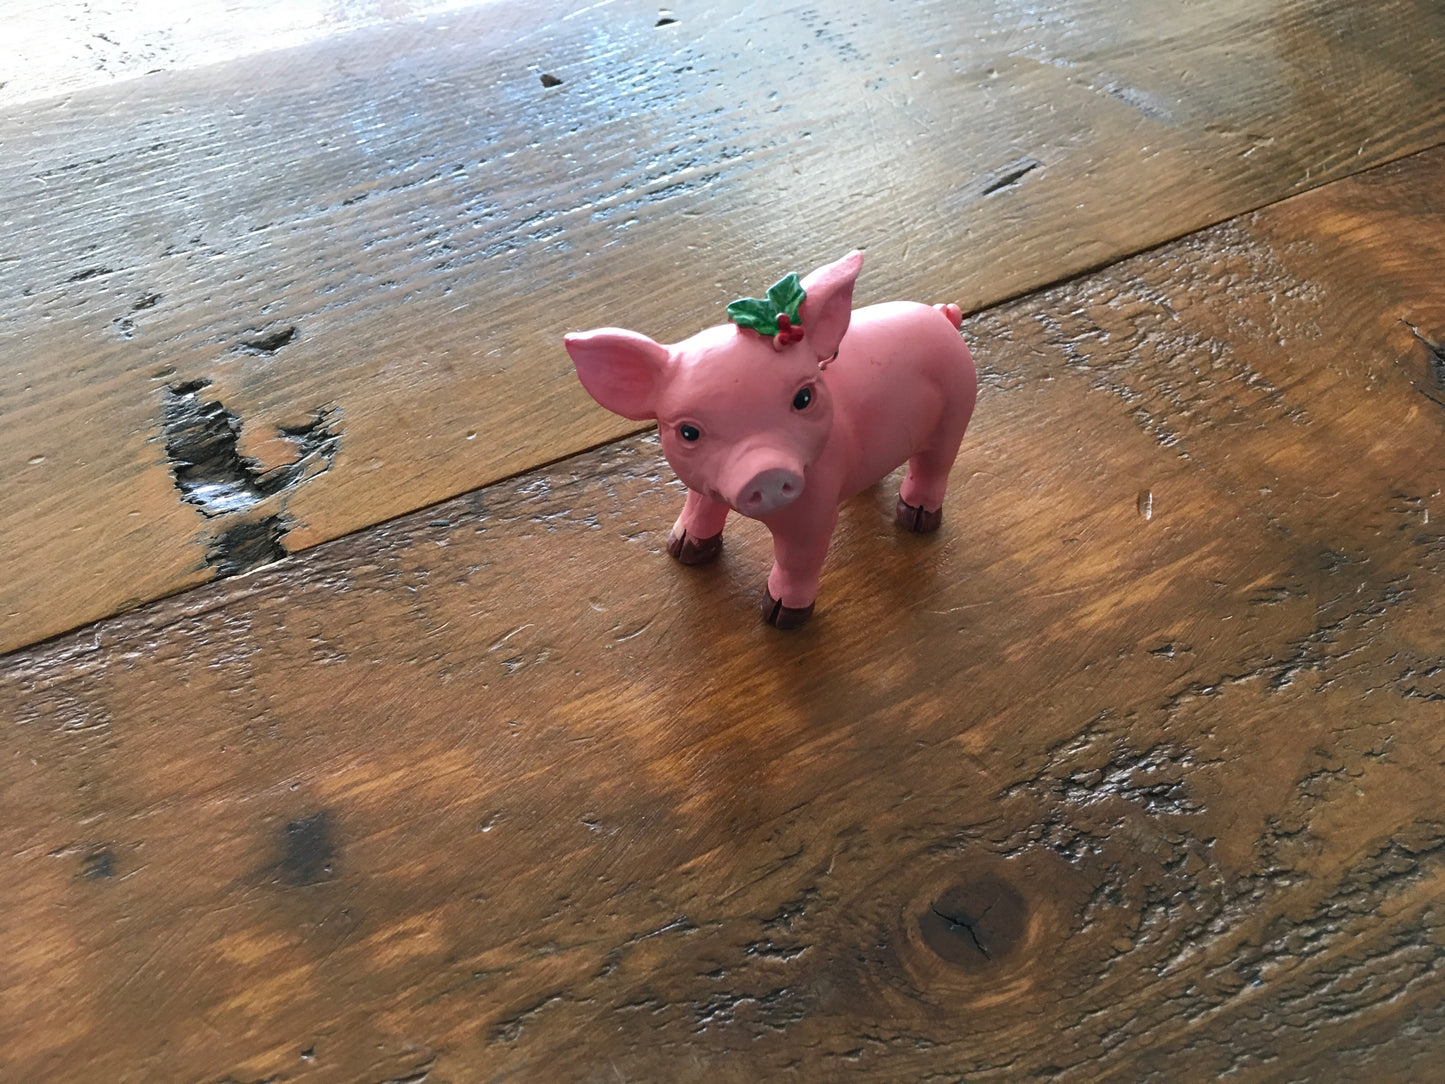 Giftware piglet lucky charm ornament EX20327